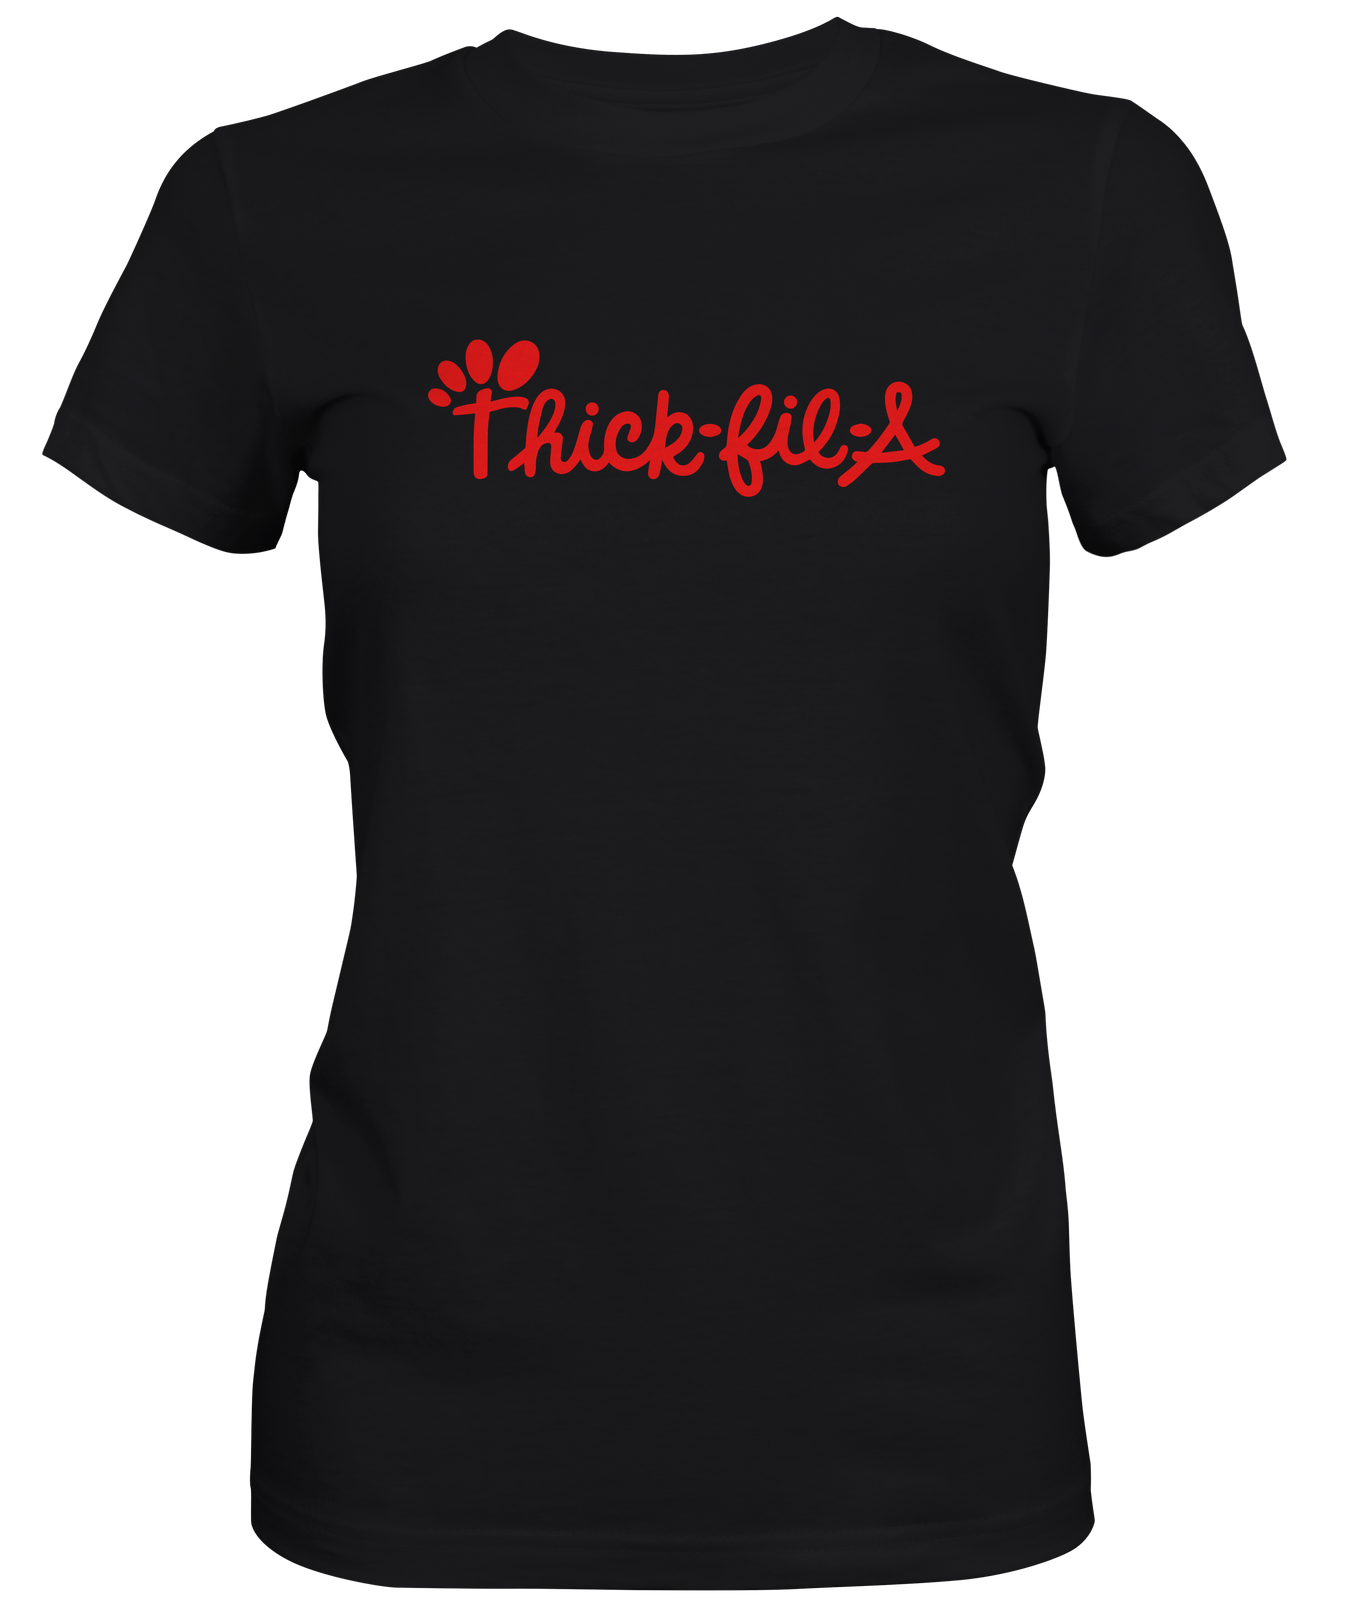 Just for the Ladies T-shirts